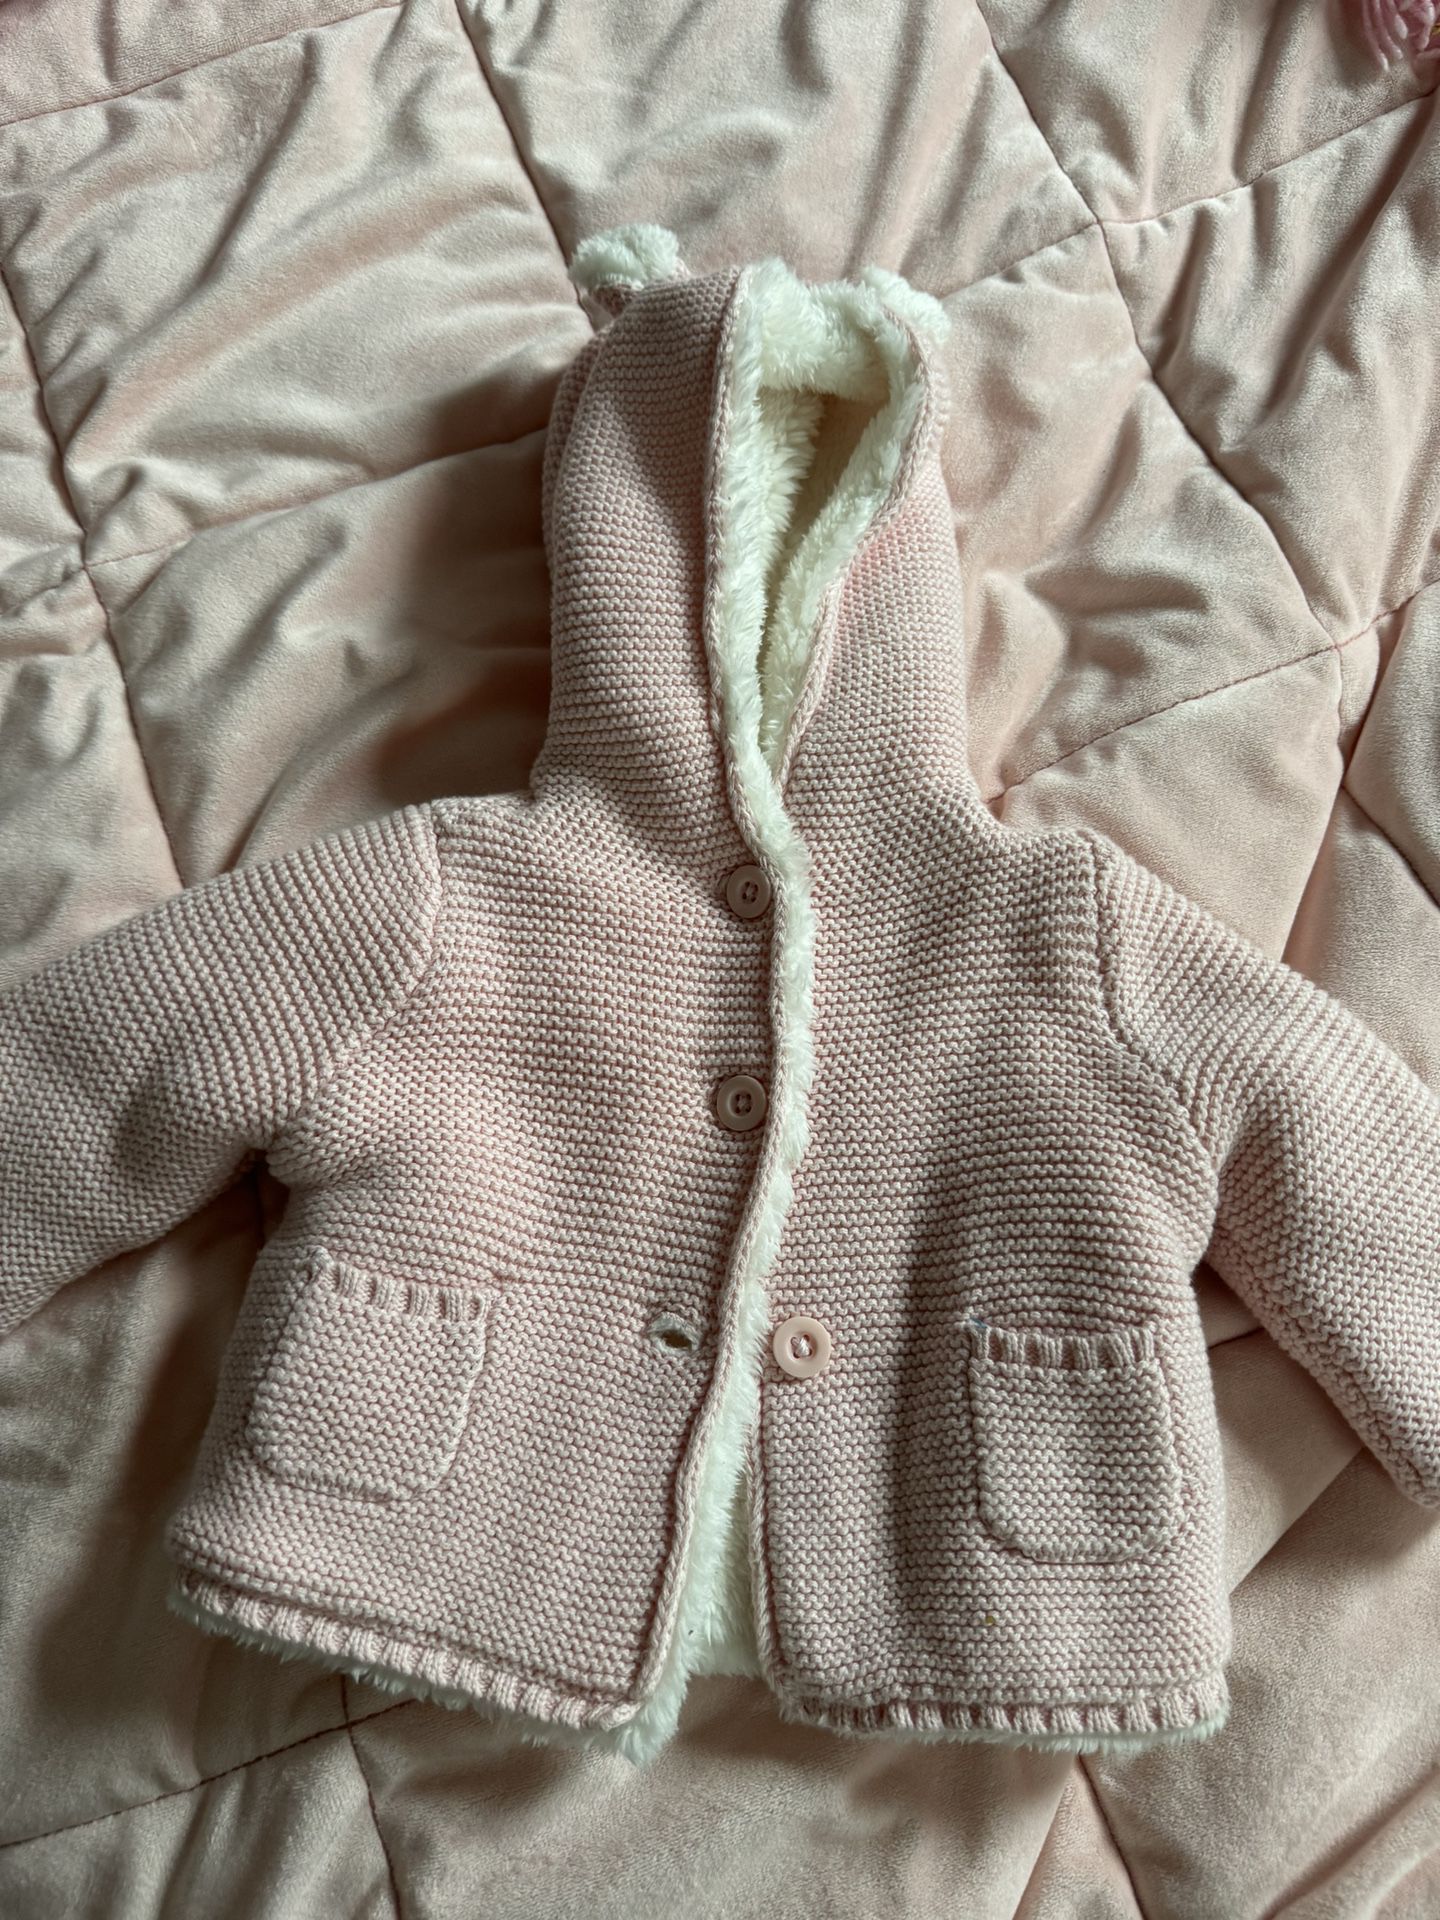 0-3 Month Baby Girl Clothes